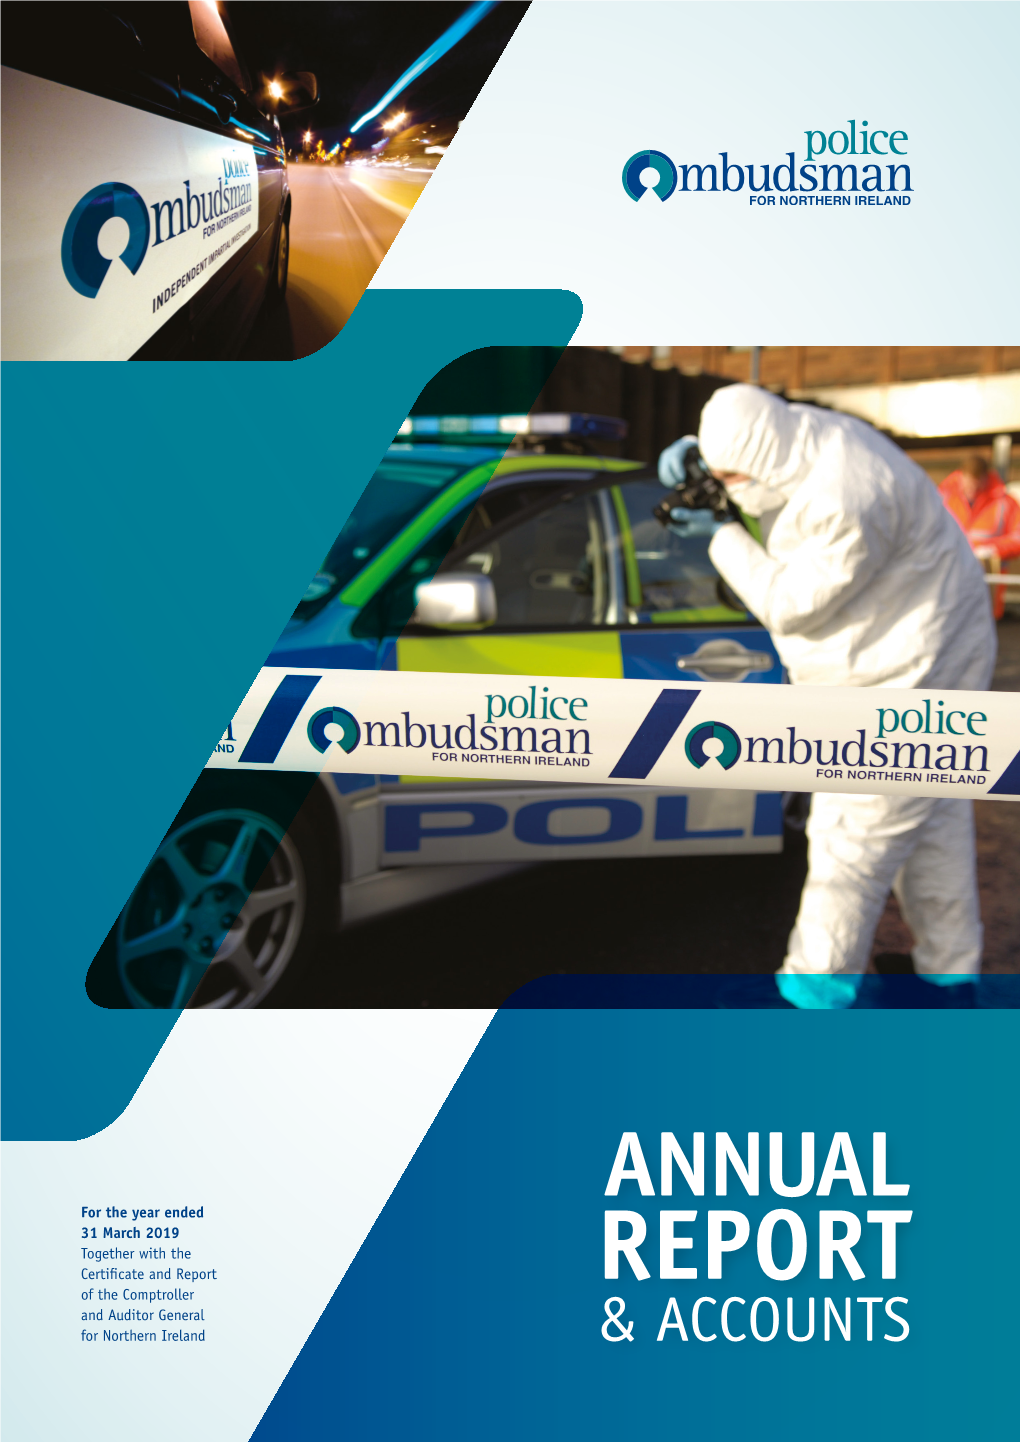 Annual Report and Accounts for the Years Ended 31 March 2019